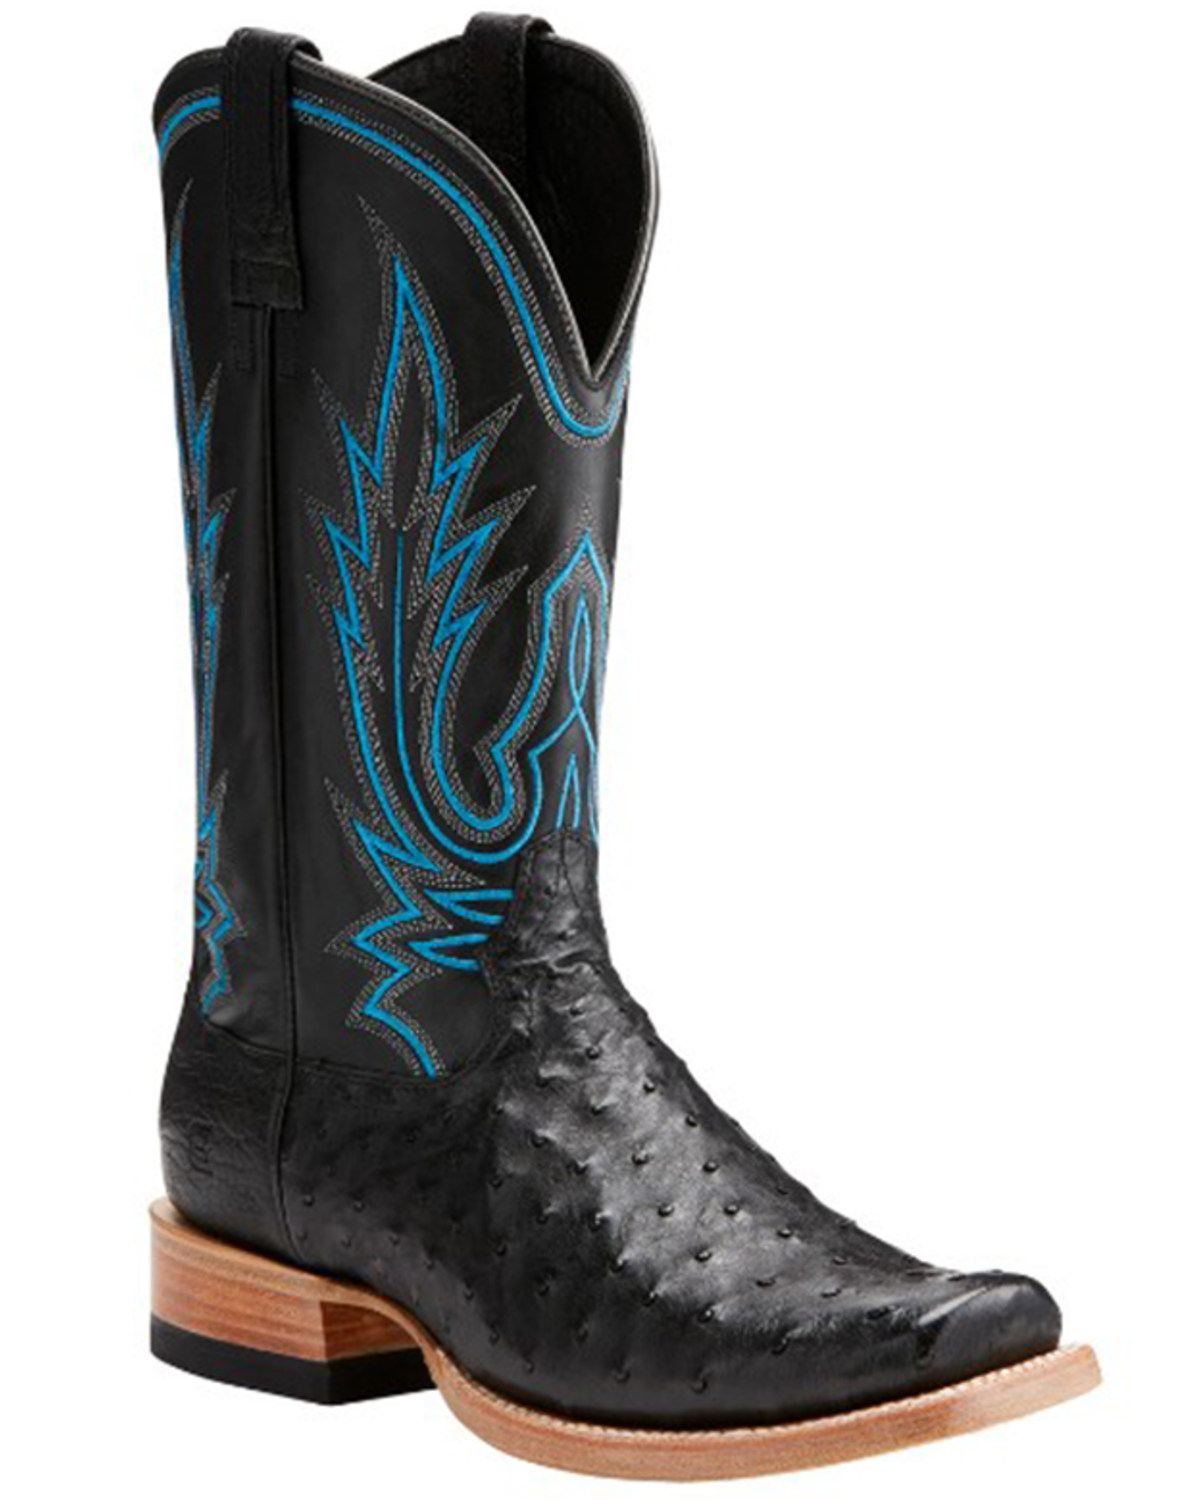 Ariat Men's Relentless All Around Exotic Ostrich Western Boots - Broad Square Toe